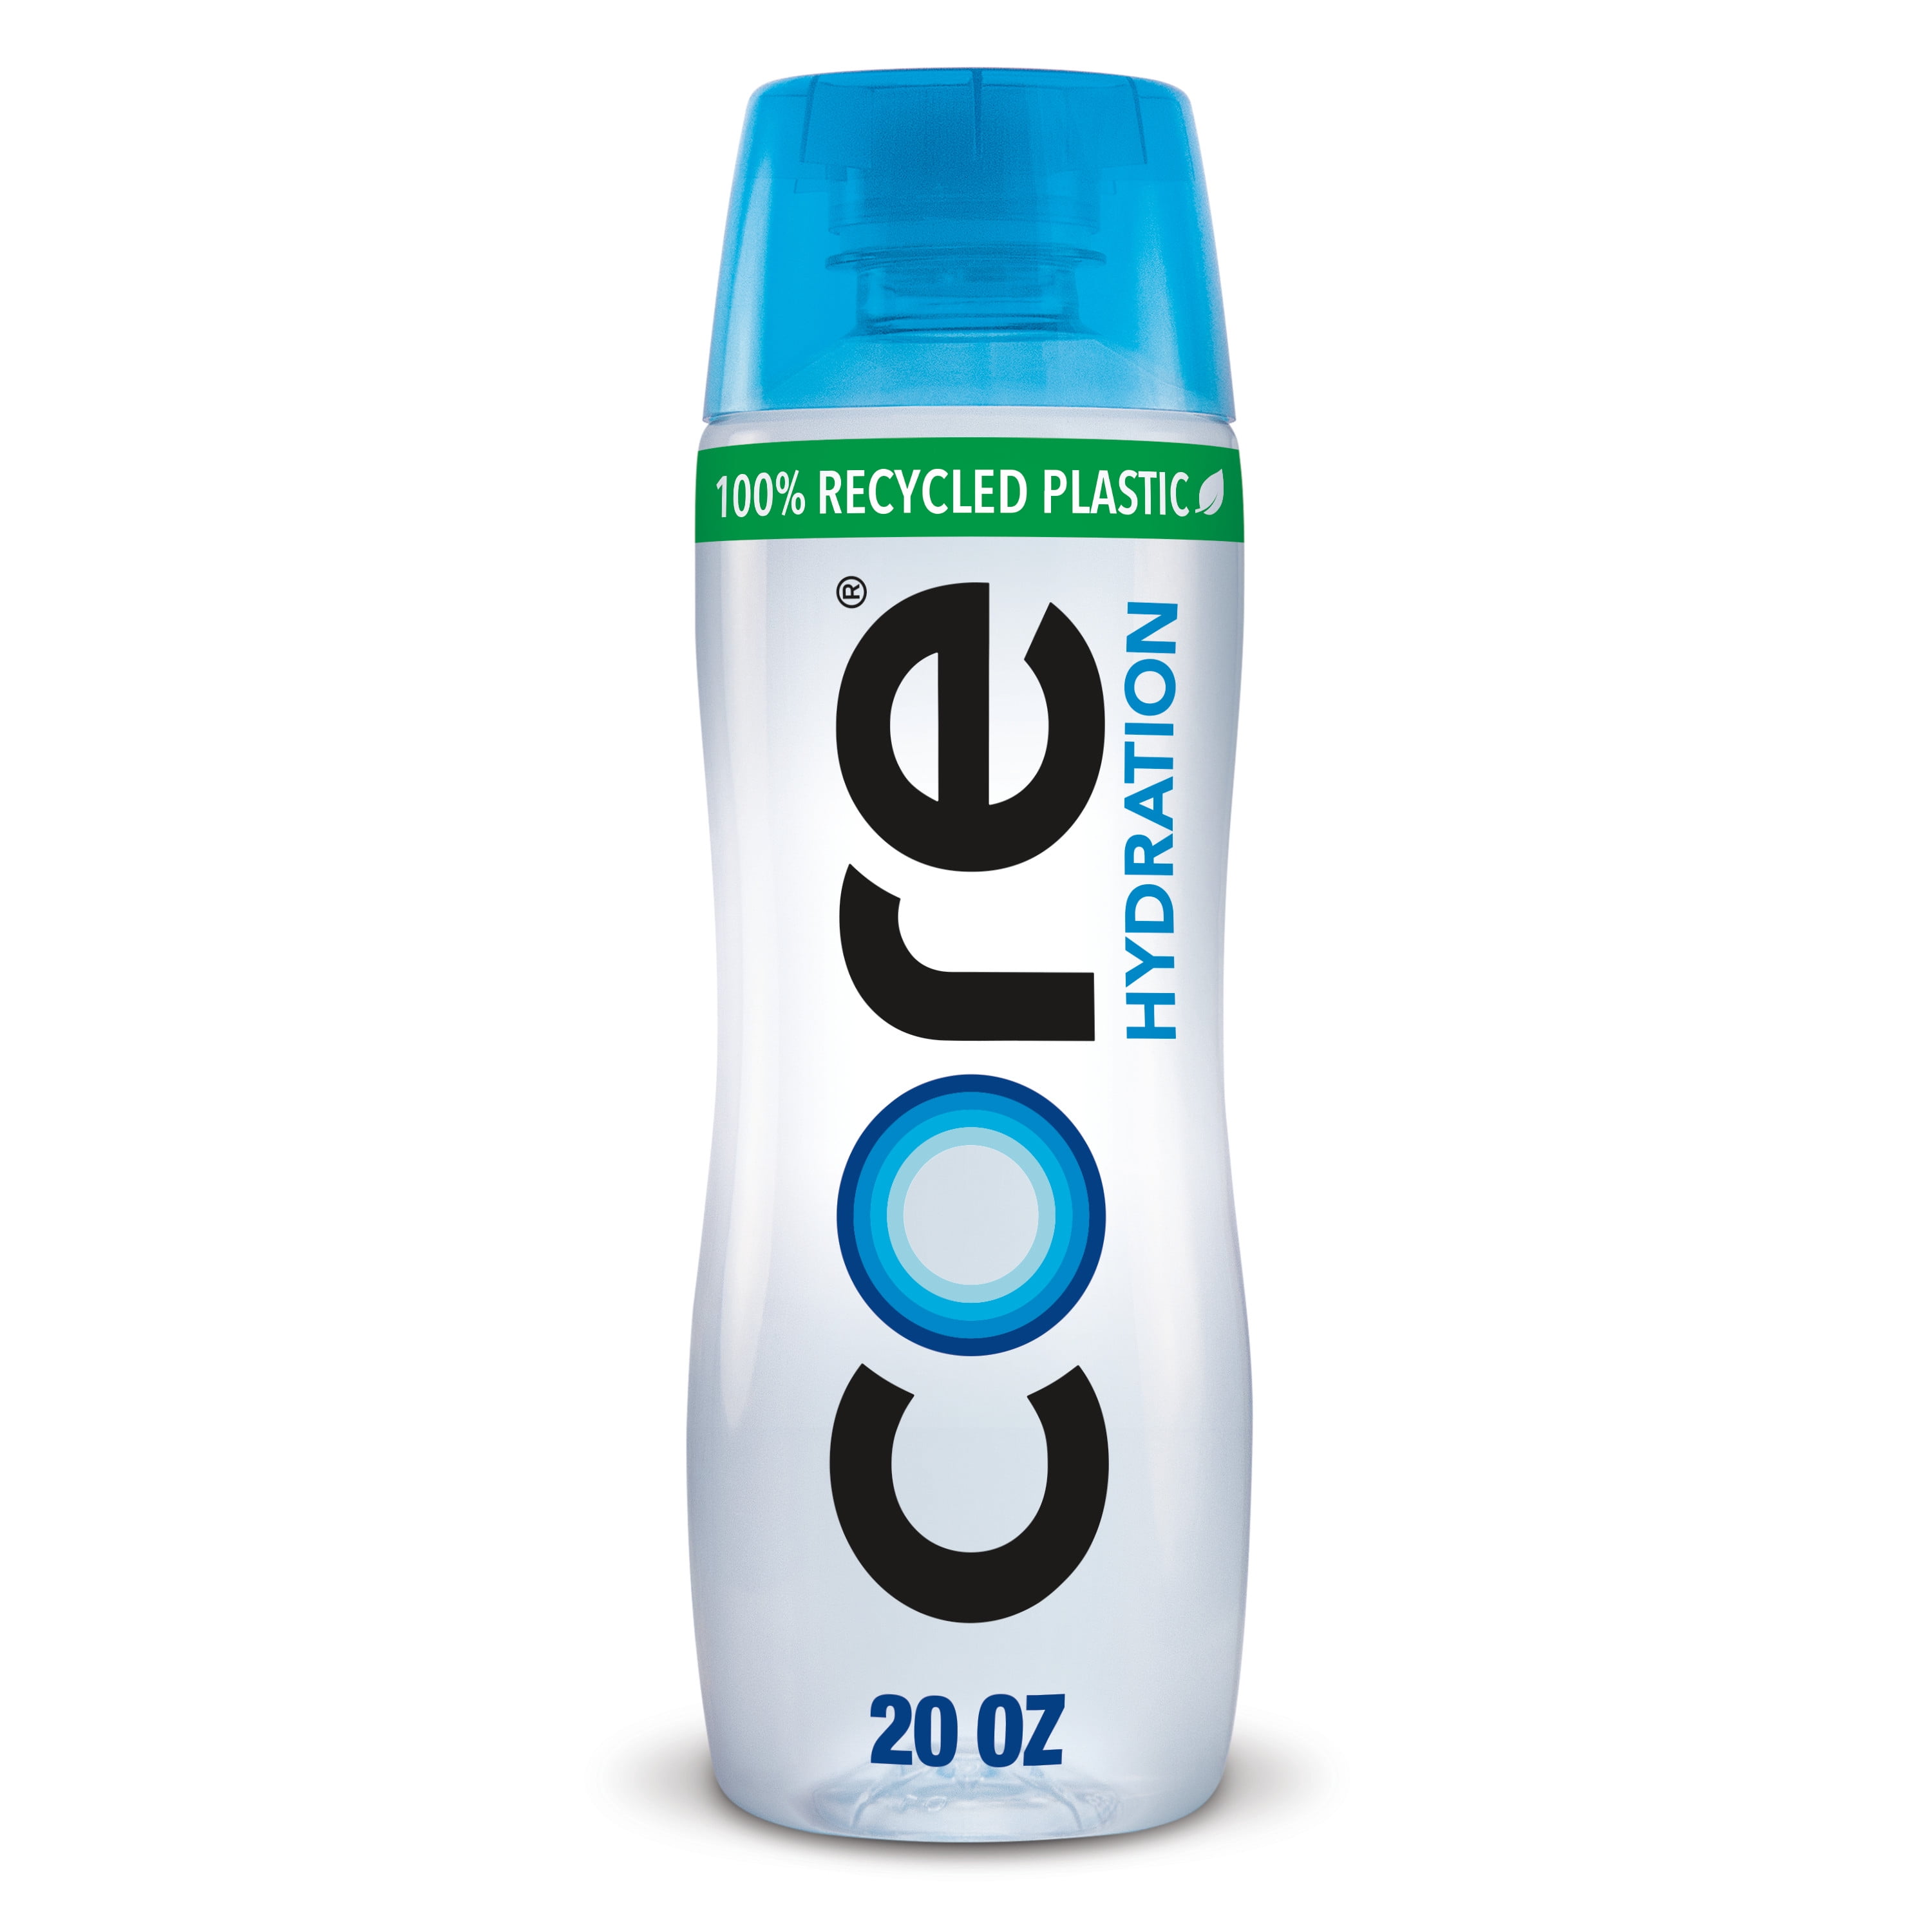 CORE Hydration Nutrient Enhanced Drinking Water, 0.5 L bottles, 6 Count 